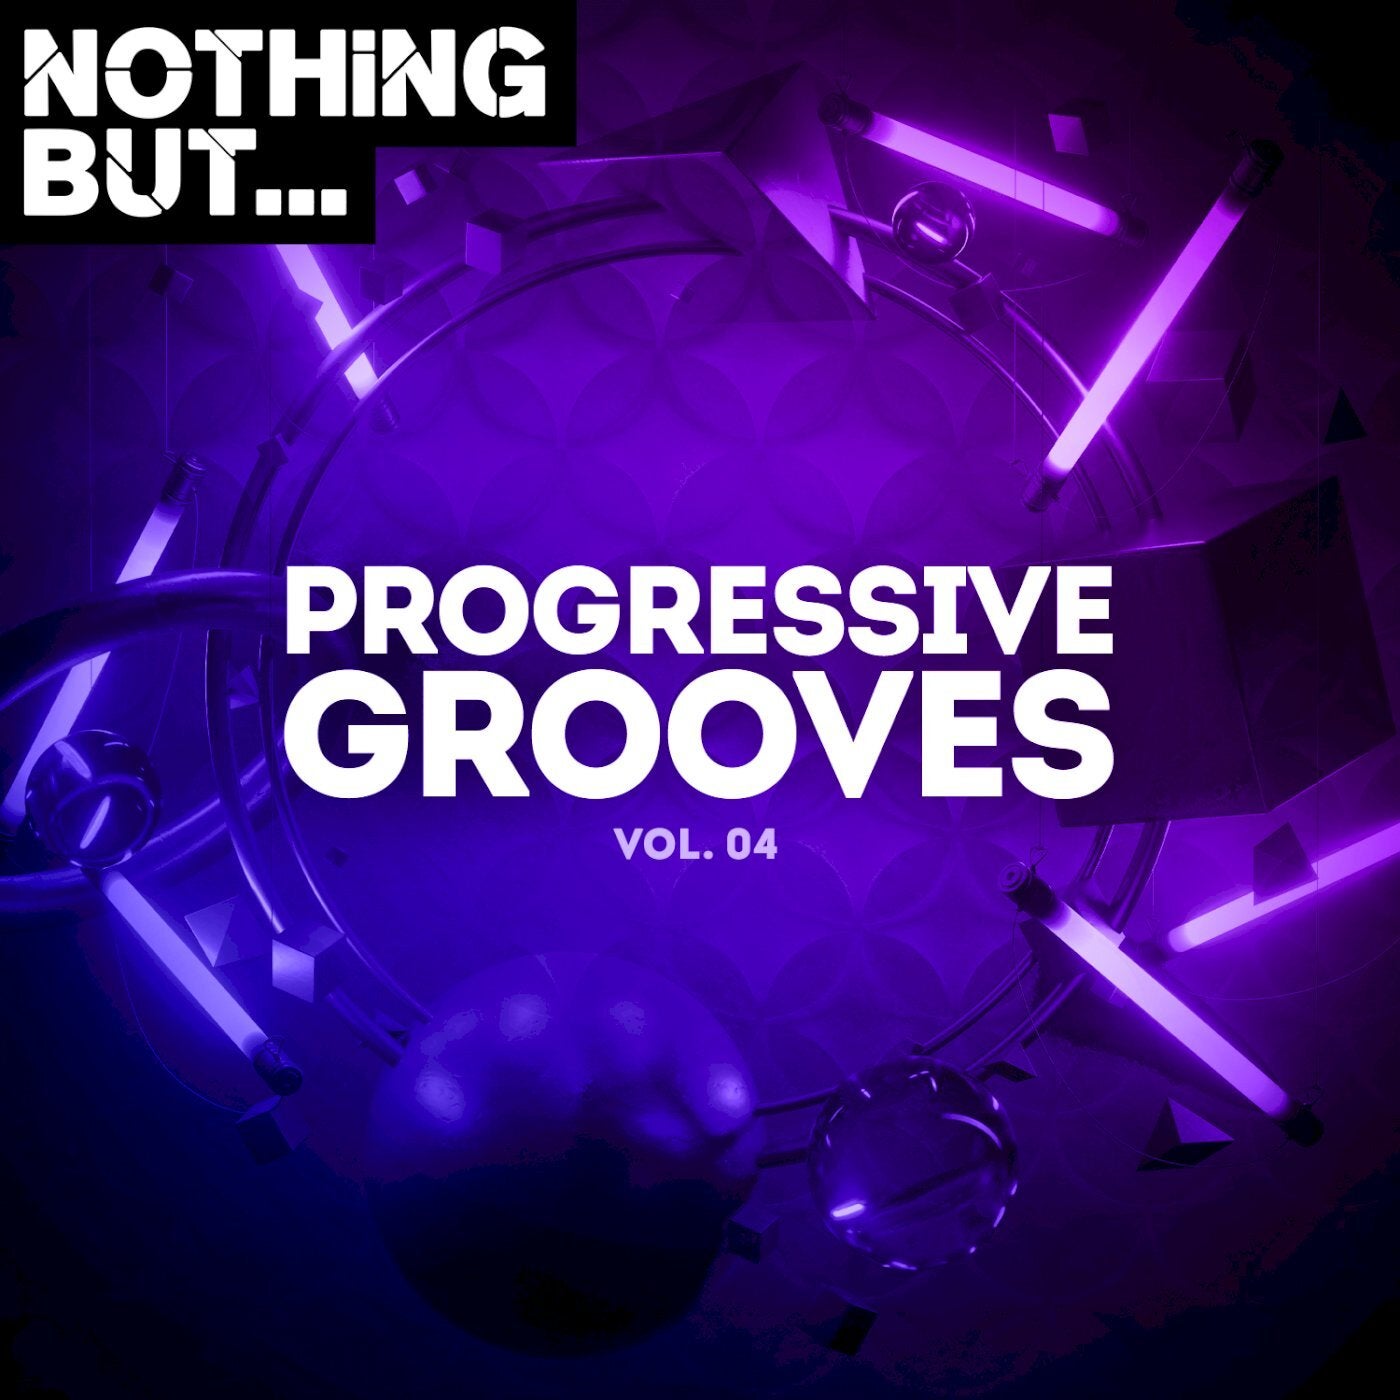 Nothing But... Progressive Grooves, Vol. 04